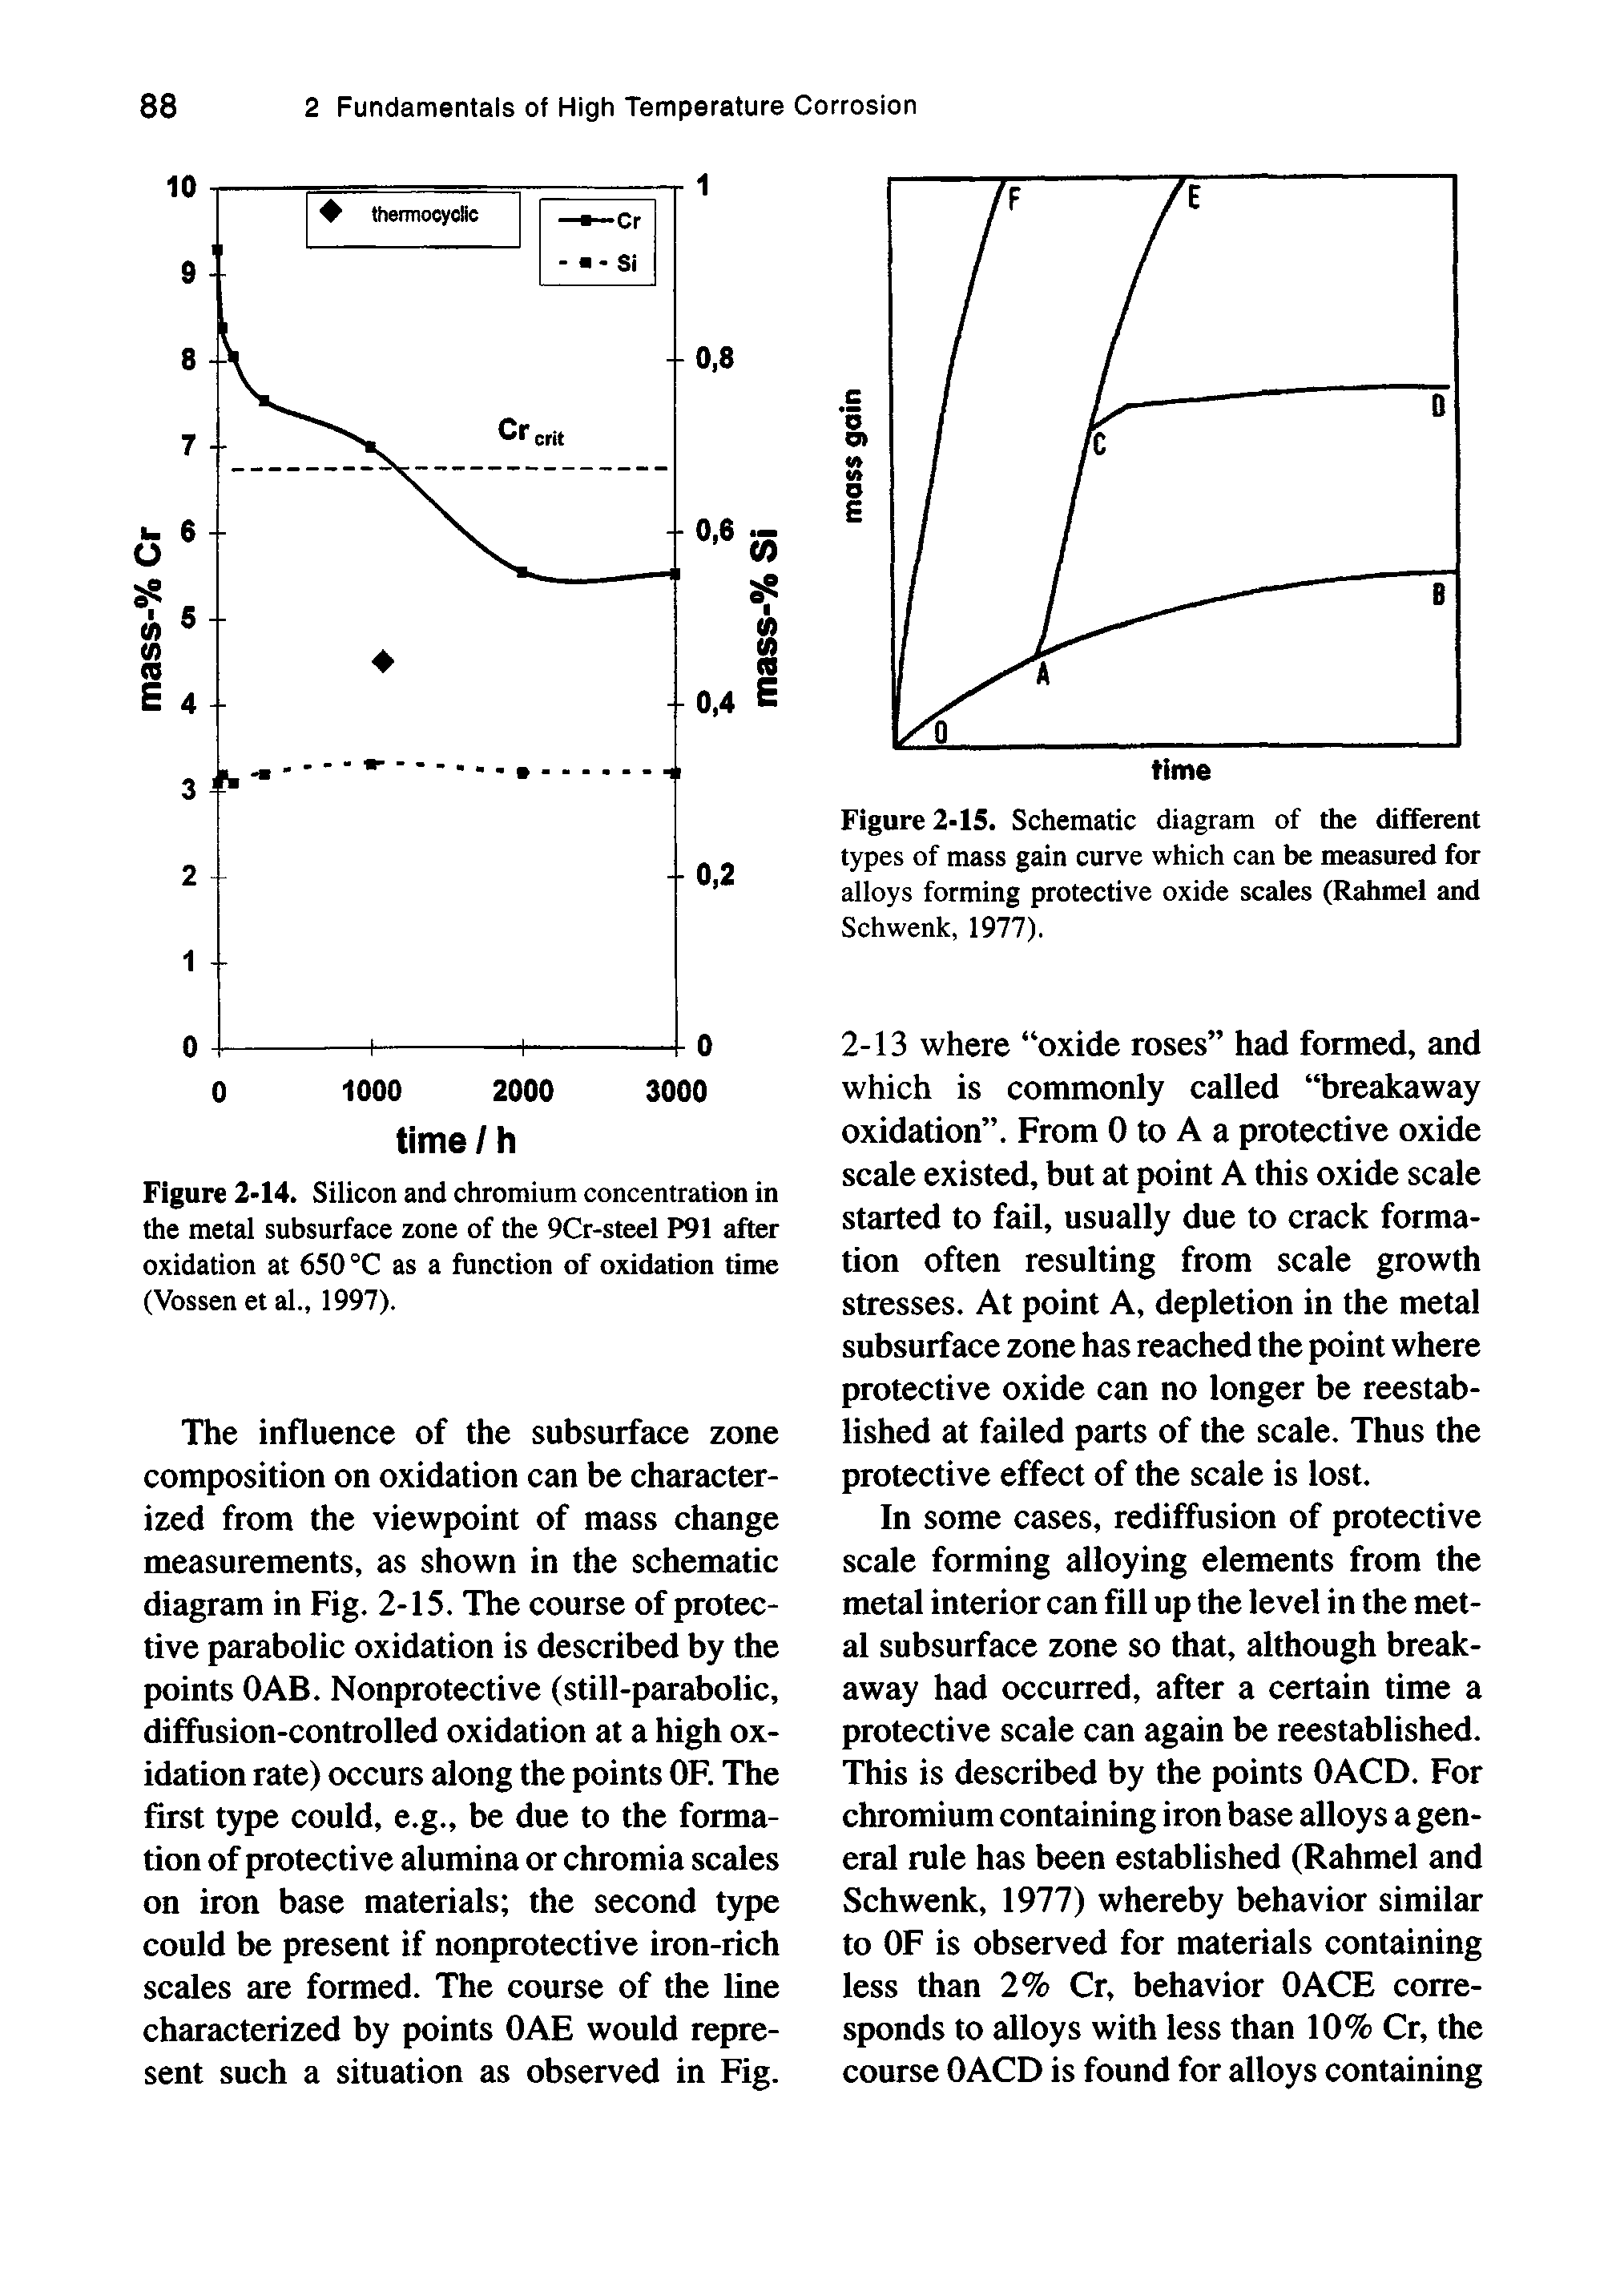 Figure 2-14. Silicon and chromium concentration in the metal subsurface zone of the 9Cr-steel P91 after oxidation at 650 °C as a function of oxidation time (Vossen et al., 1997).